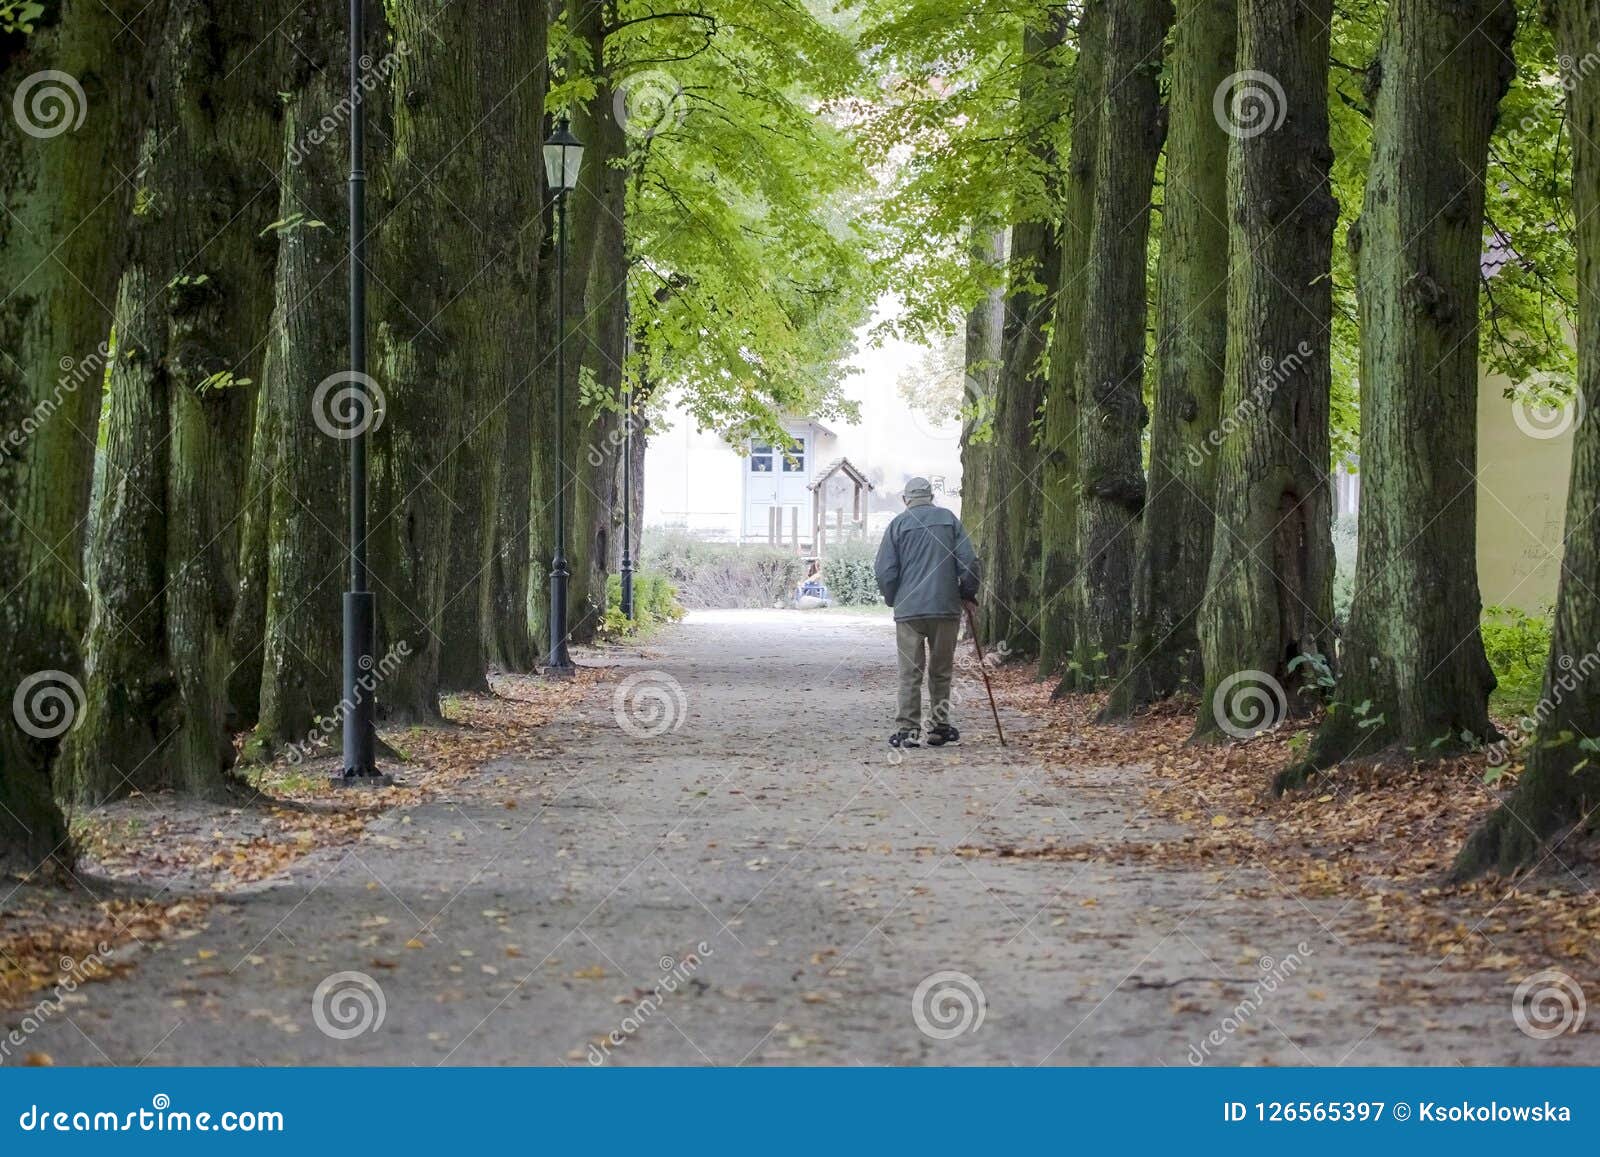 old man walking alone in the park.